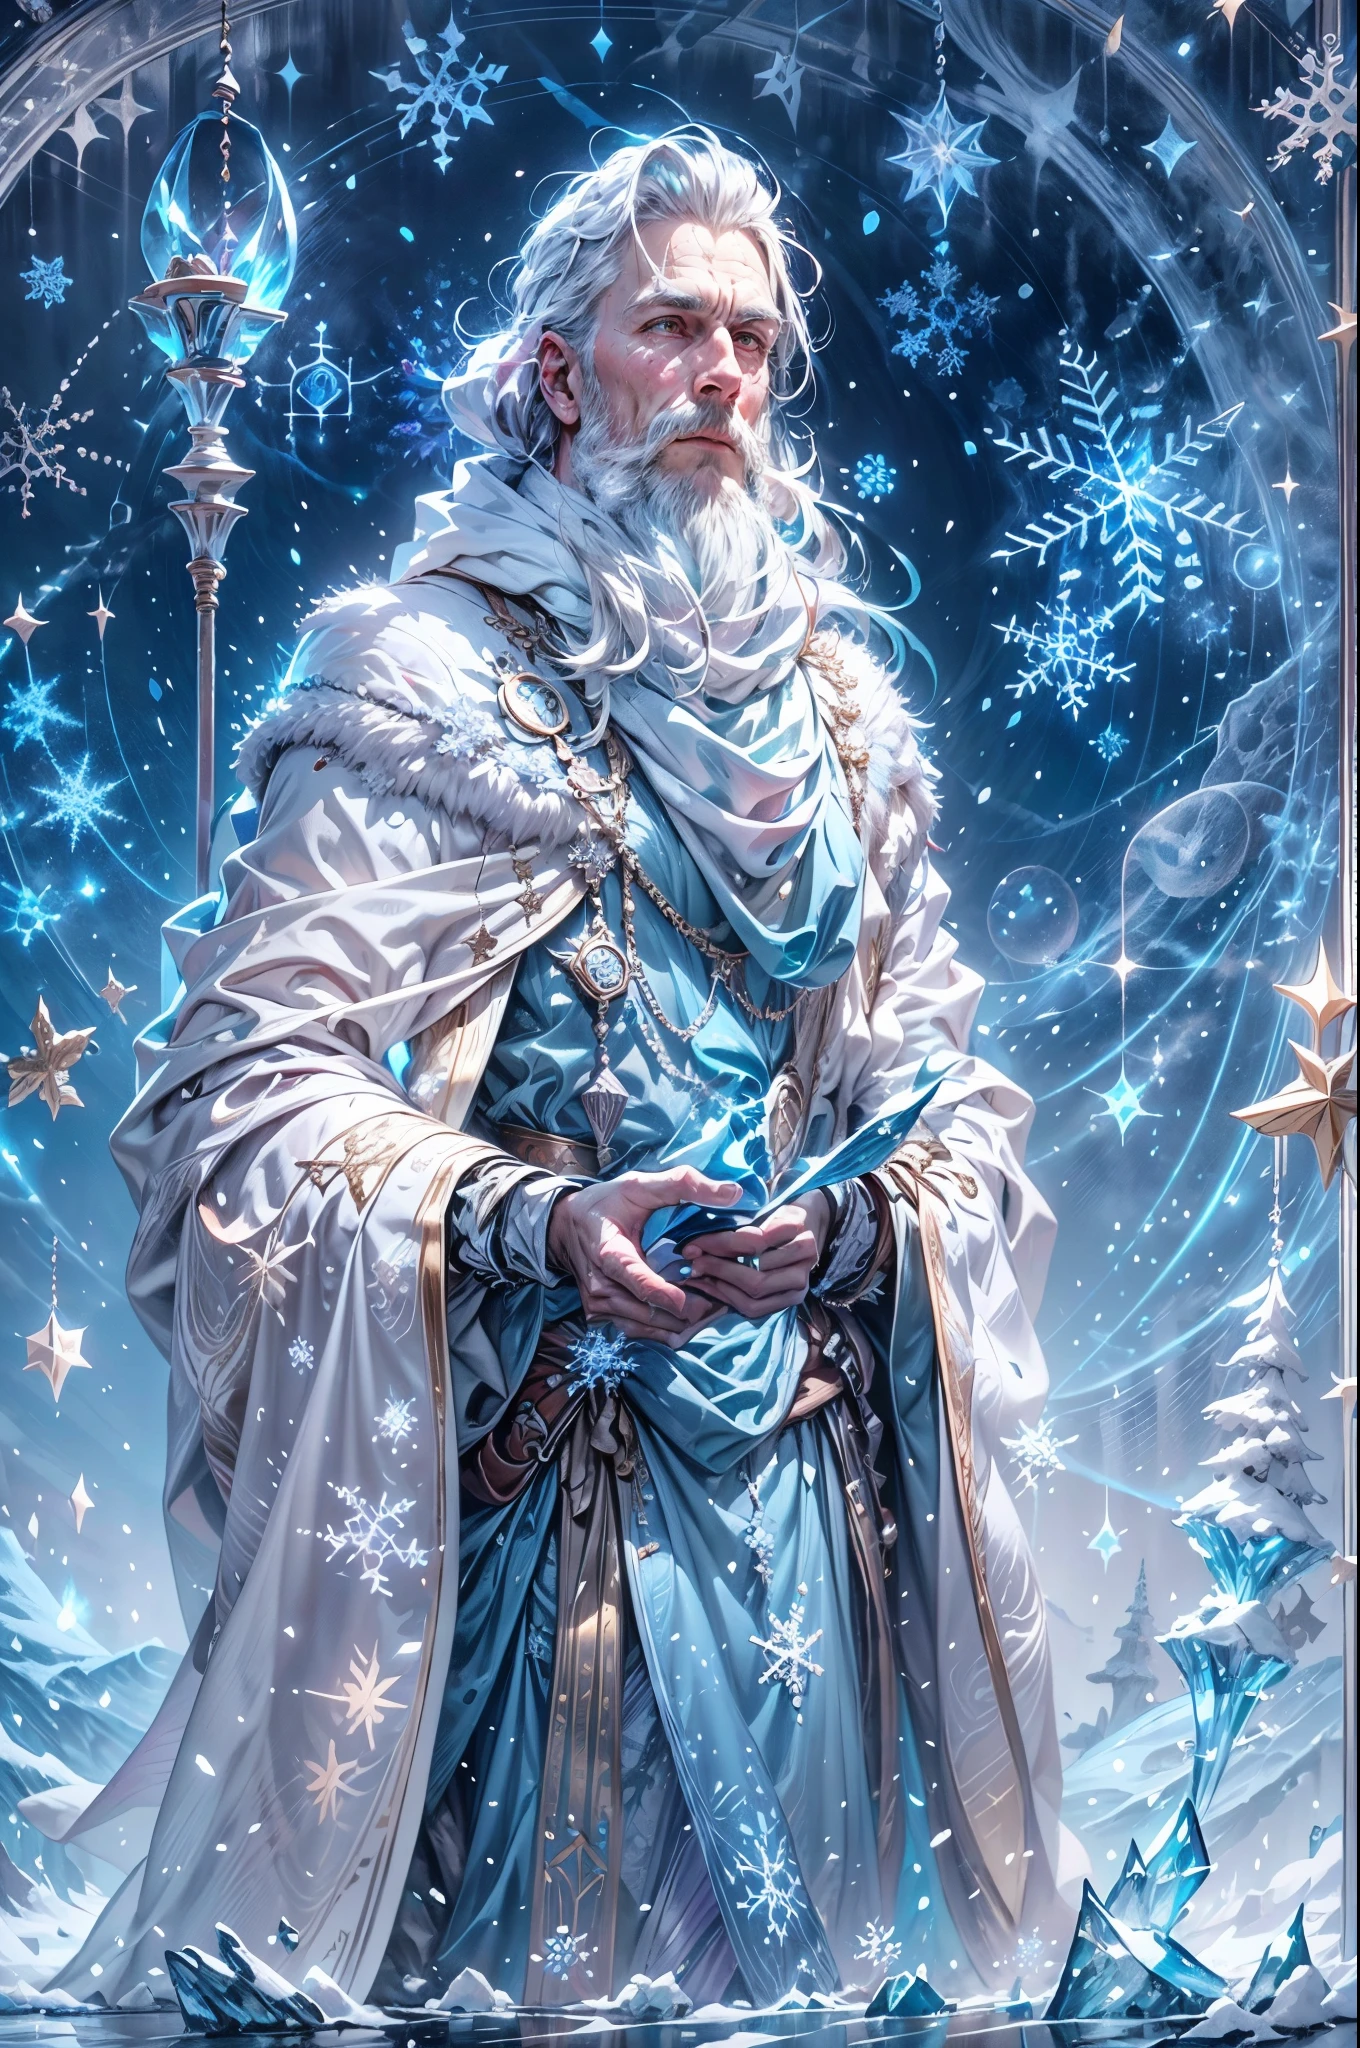 (a detailed, realistic portrait)Santa Claus(,the iconic Christmas figure,)as an ice wizard,in a snowy winter landscape(dotted with frosted trees and gently falling snowflakes).His(white, flowing)beard(glistens with ice crystals and)extends(below his waist).He wears(a long, blue robe),(embroidered with delicate snowflake patterns),that billows in the cold wind, and(a silver belt)cinches his waist. His eyes(glitter with a subtle blue hue)and(his nose is adorned with a snowflake-shaped)-shaped silver ring. In one hand, he holds(a sparkling icicle staff)that emits a soft, cool glow.(He stands atop a towering)ice platform,(emitting an ethereal blue light)that emanates from underneath it. The sky(dons a palette of icy blue and lavender hues),while(pale sunlight)peeks through the clouds, casting a(soft, cool glow)over the entire scene.